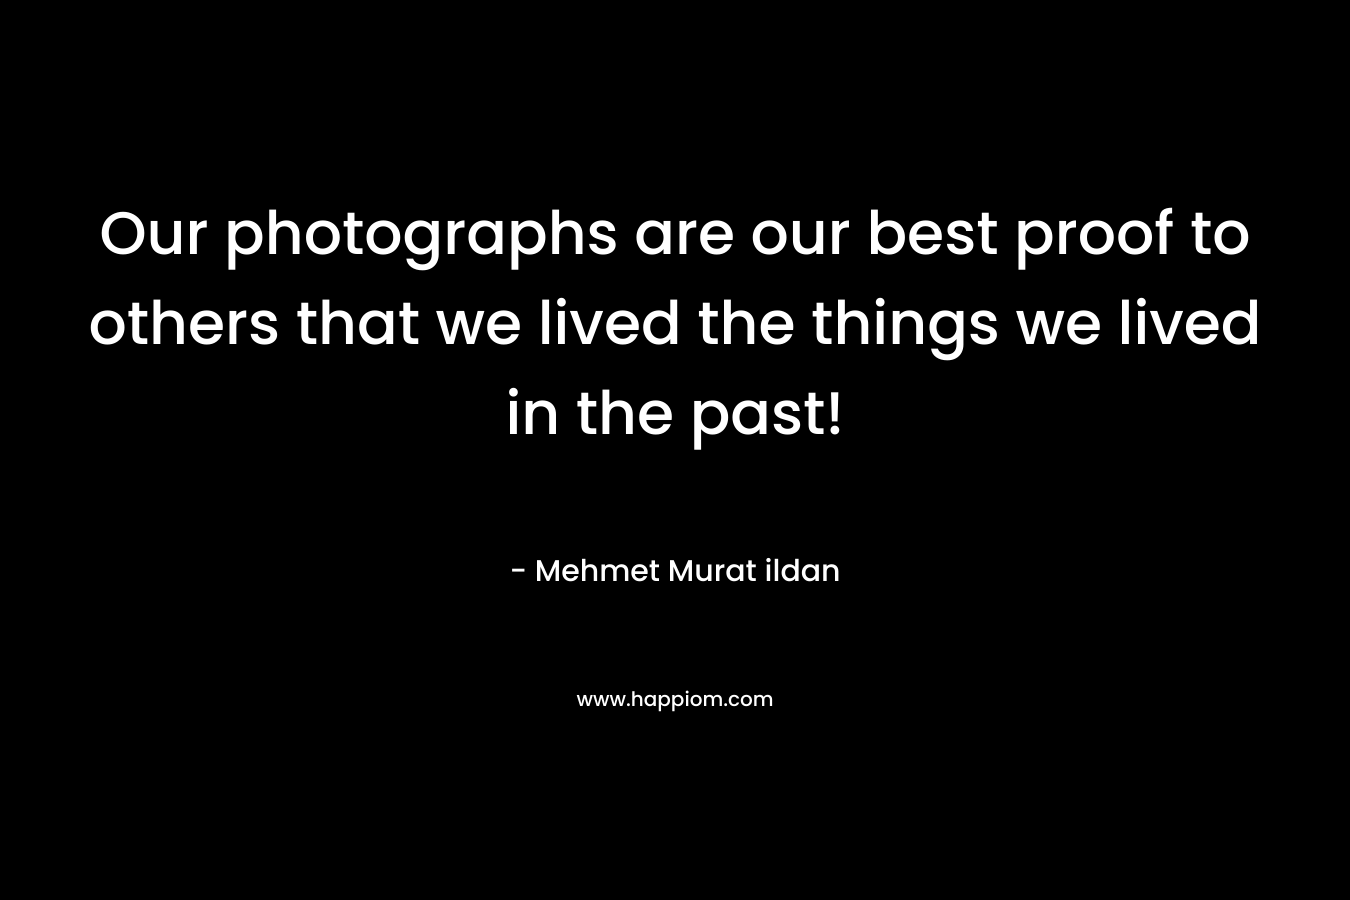 Our photographs are our best proof to others that we lived the things we lived in the past! – Mehmet Murat ildan